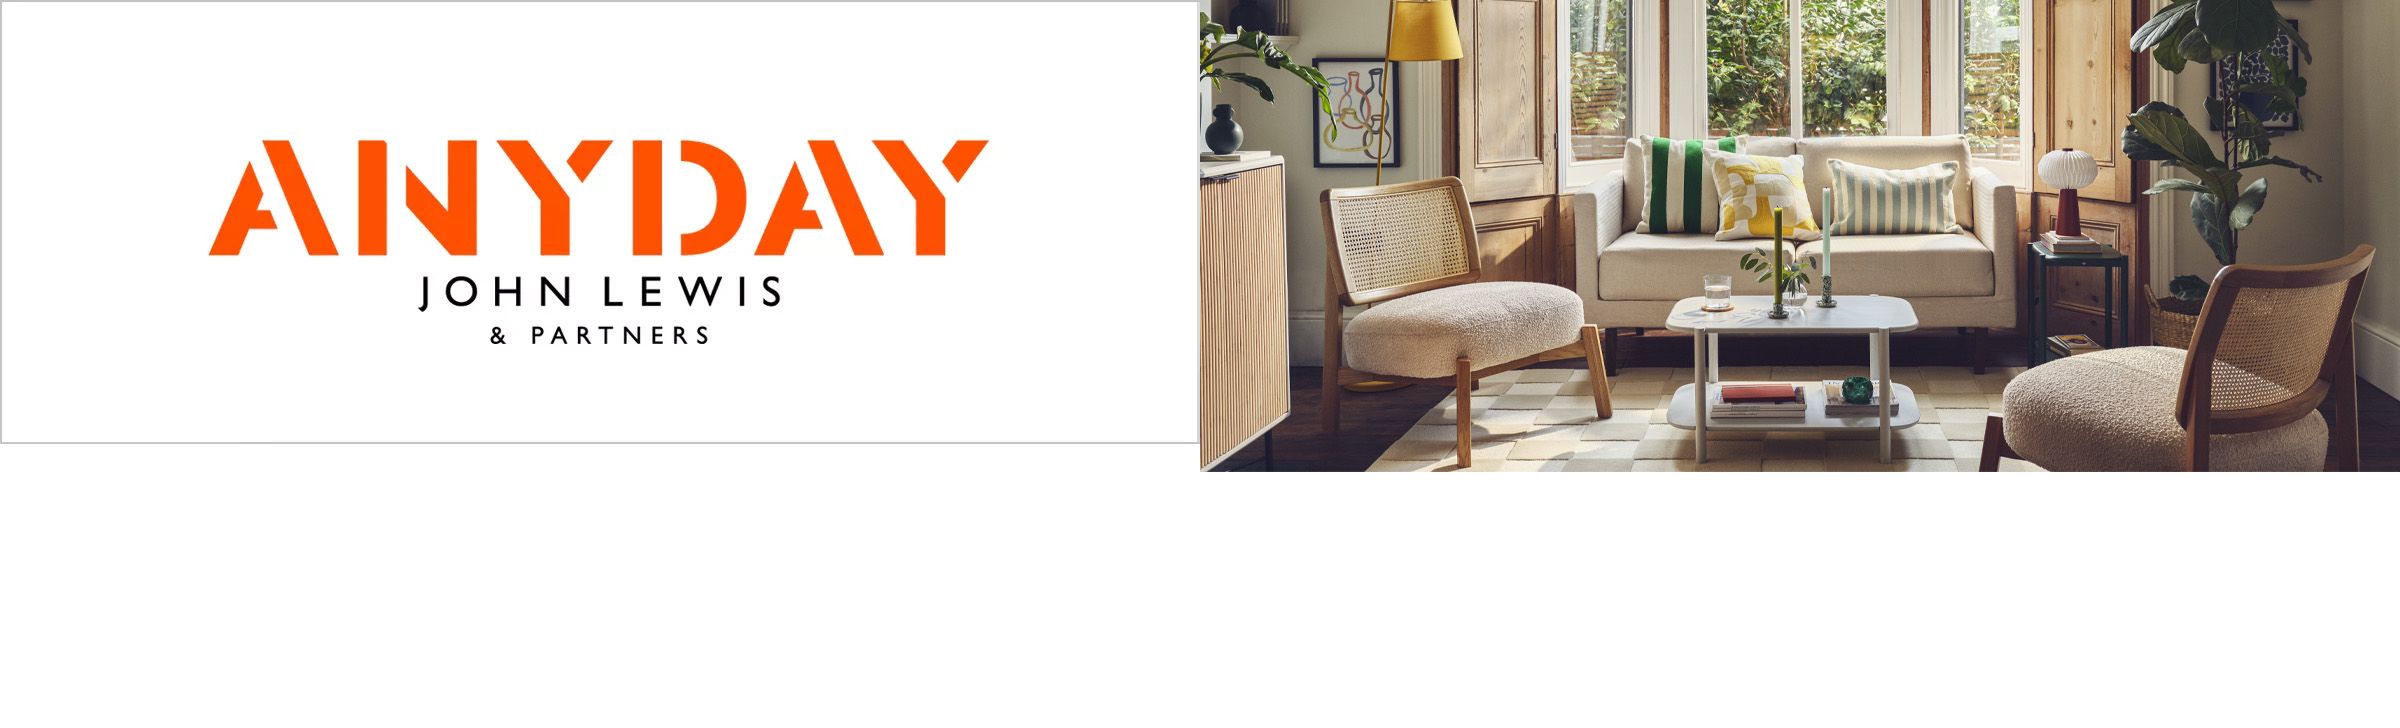 Anyday (Living) banner